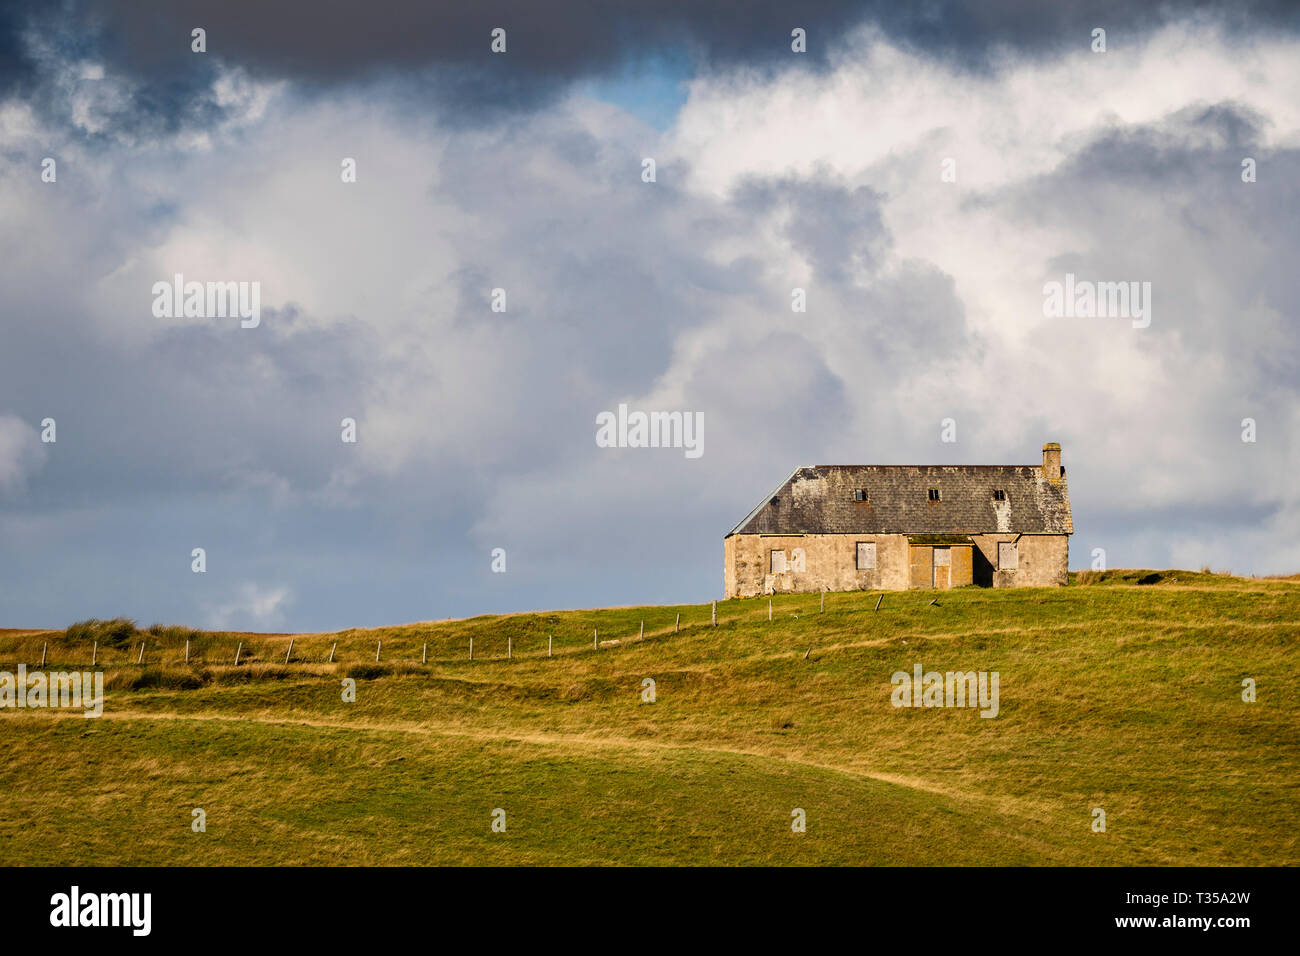 Abandoned crofter's house on a hill off the B871 in the Scottish Highlands. Stock Photo